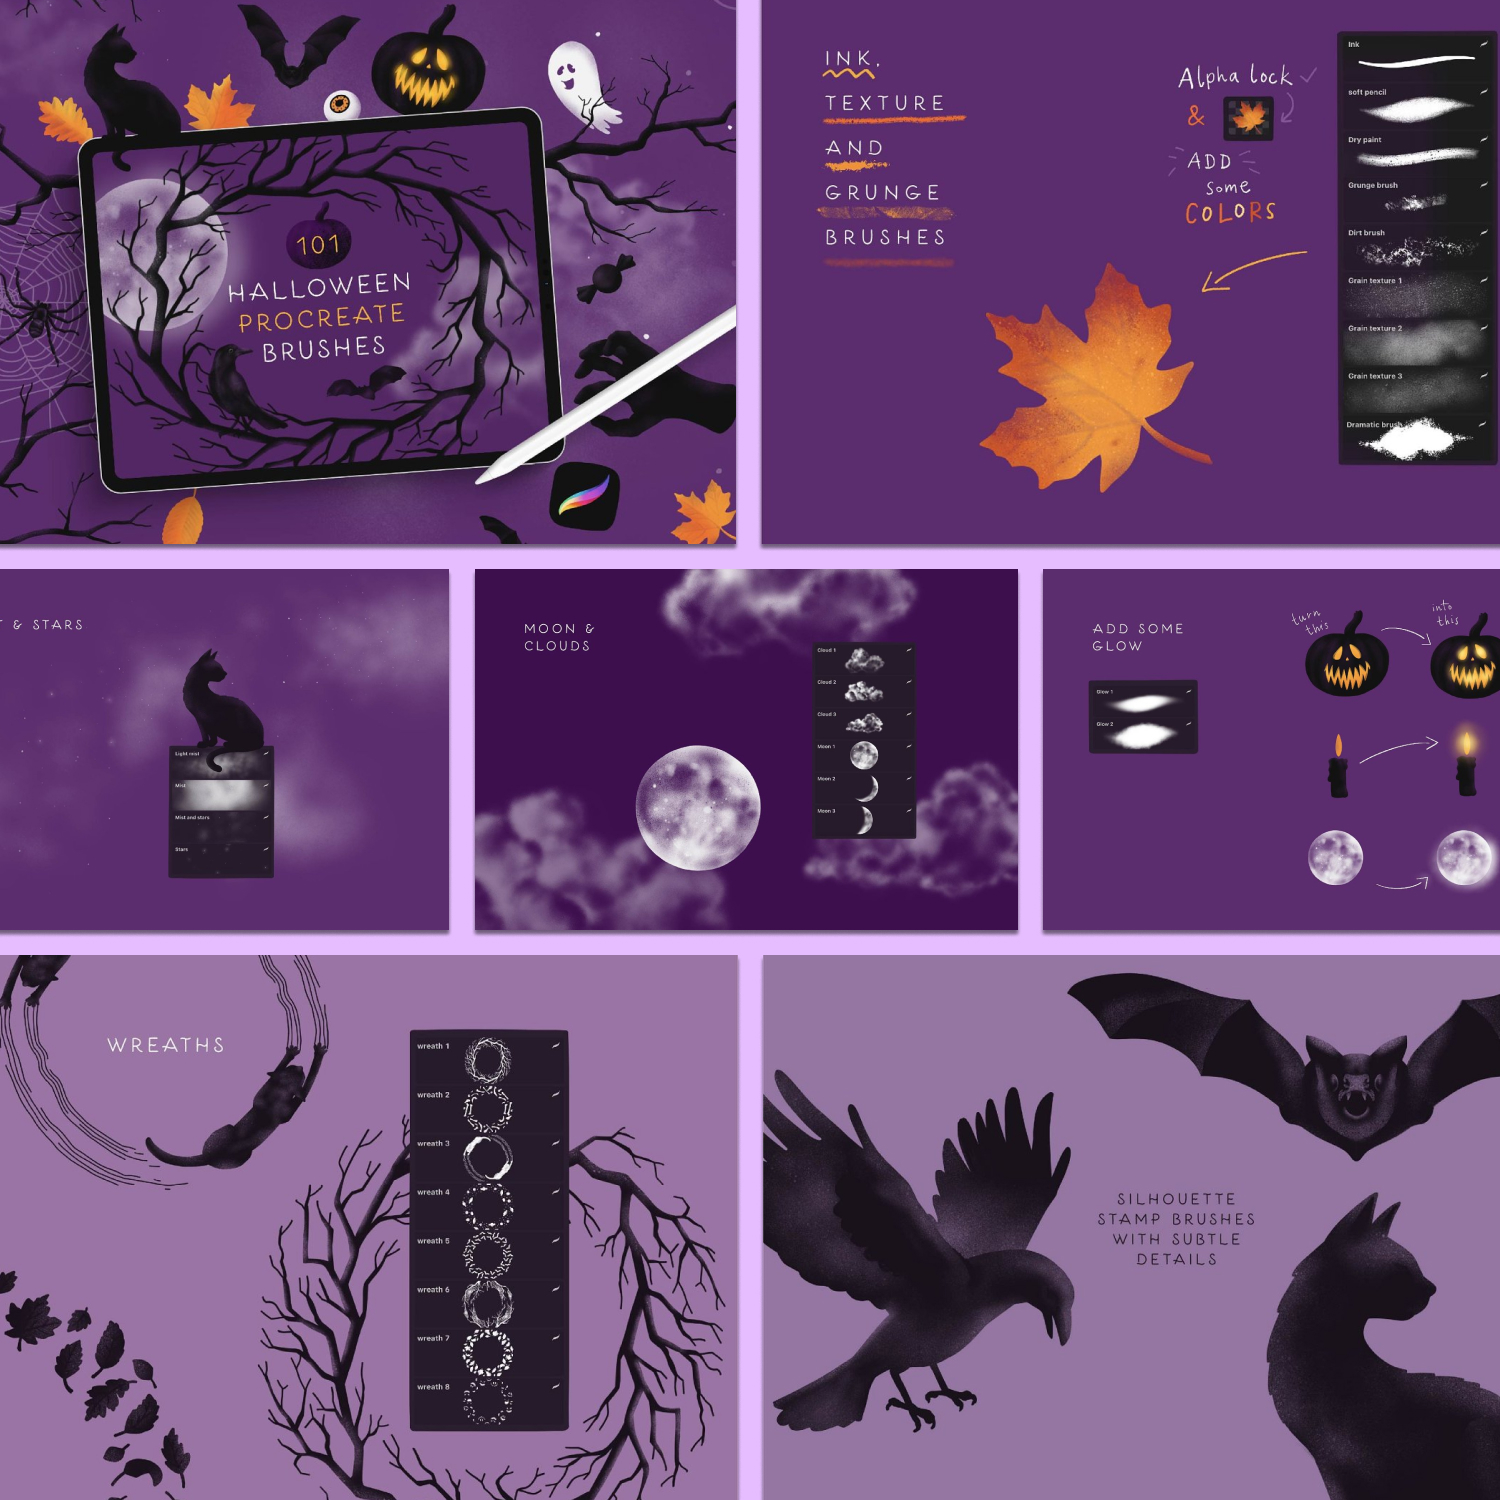 The cards feature Halloween-themed bats, crows, and cats.